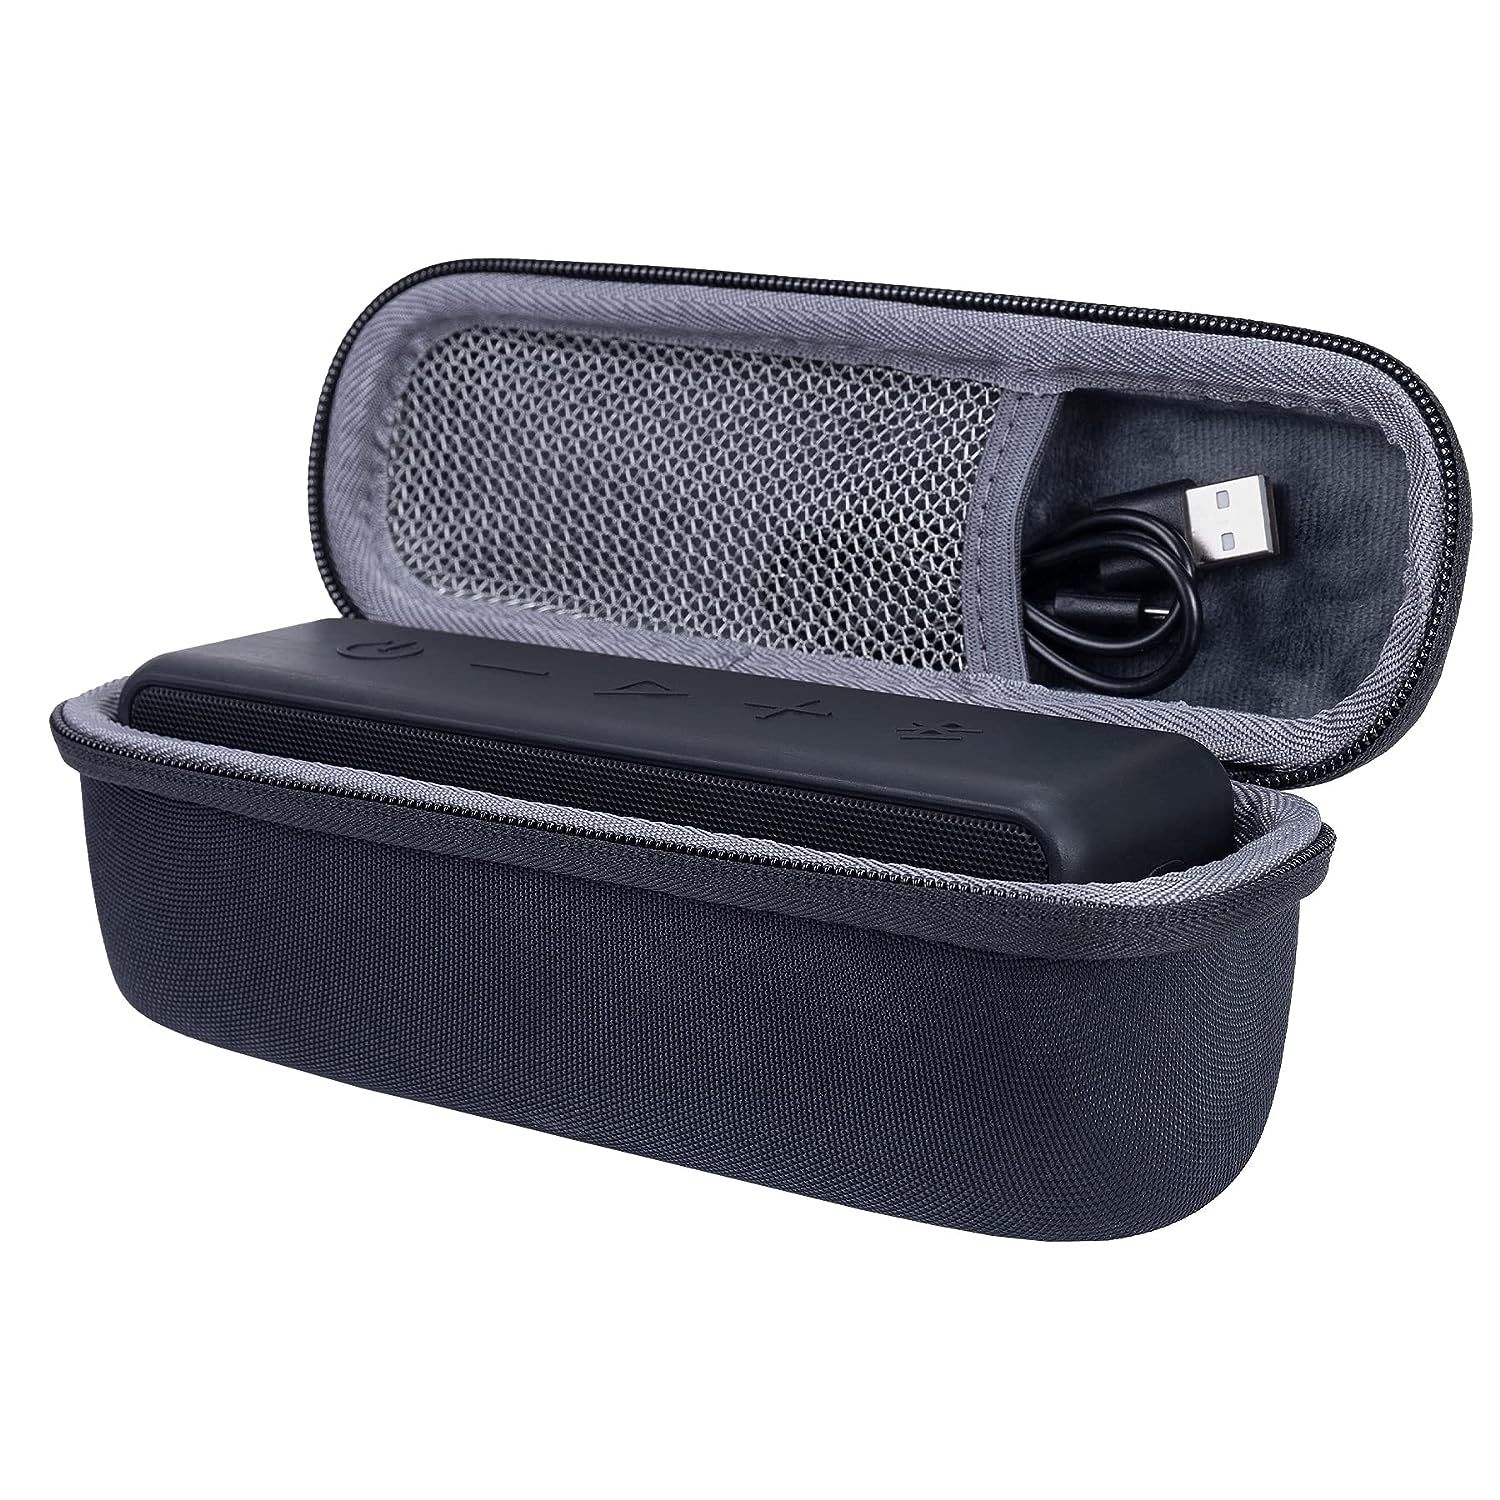 Primary image for co2CREA Hard Case Replacement for Anker SoundCore/SoundCore 2 / Motion B Portabl